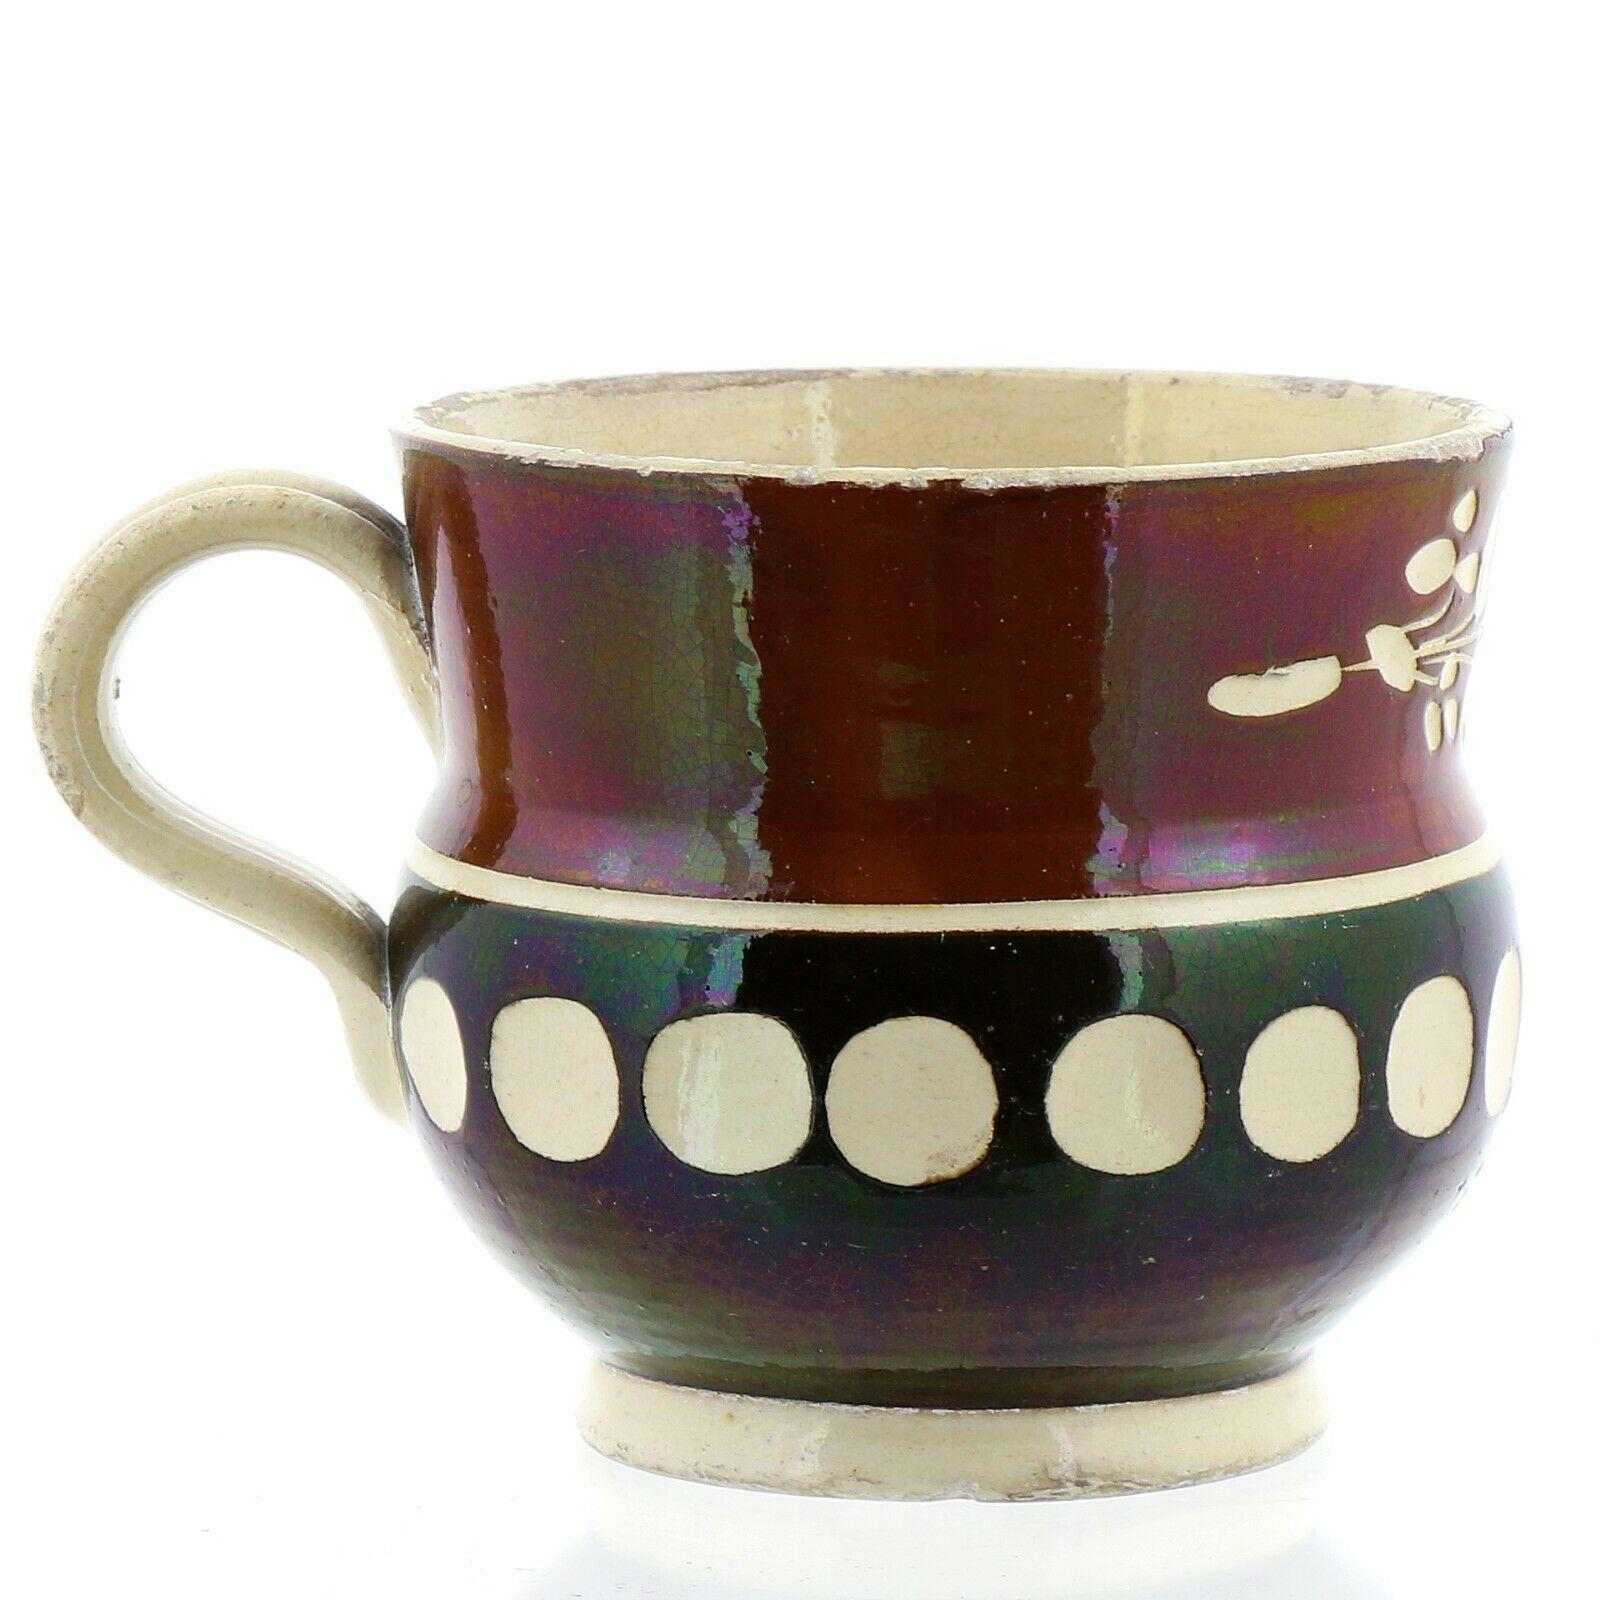 French Mocha Creamware mug, 1800-30

The mug is circular in form with an upper section in a plum color with white flowers and the lower slightly bulbous section in black with a band of white dots and with a plain cream-colored loop handle.